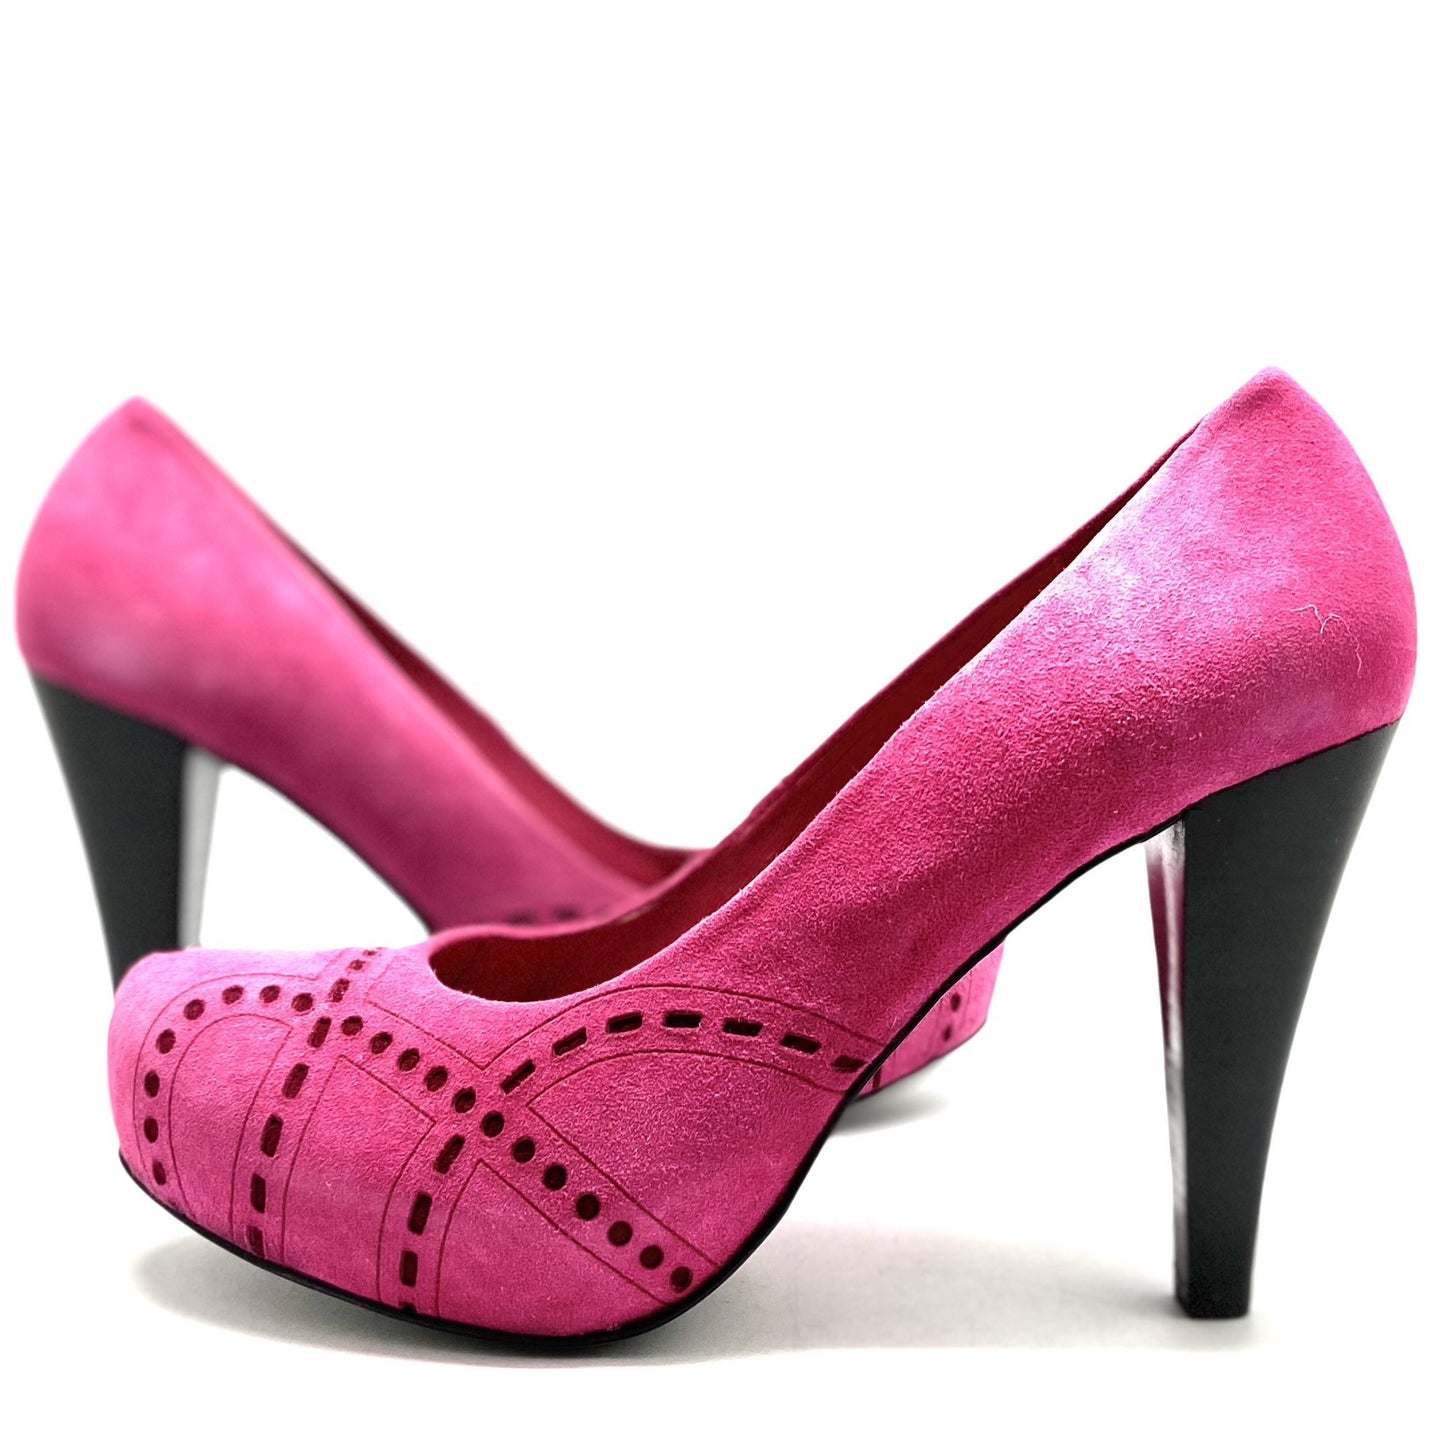 Vain Fuchsia 38-40, 41 ,42 and 43 only!